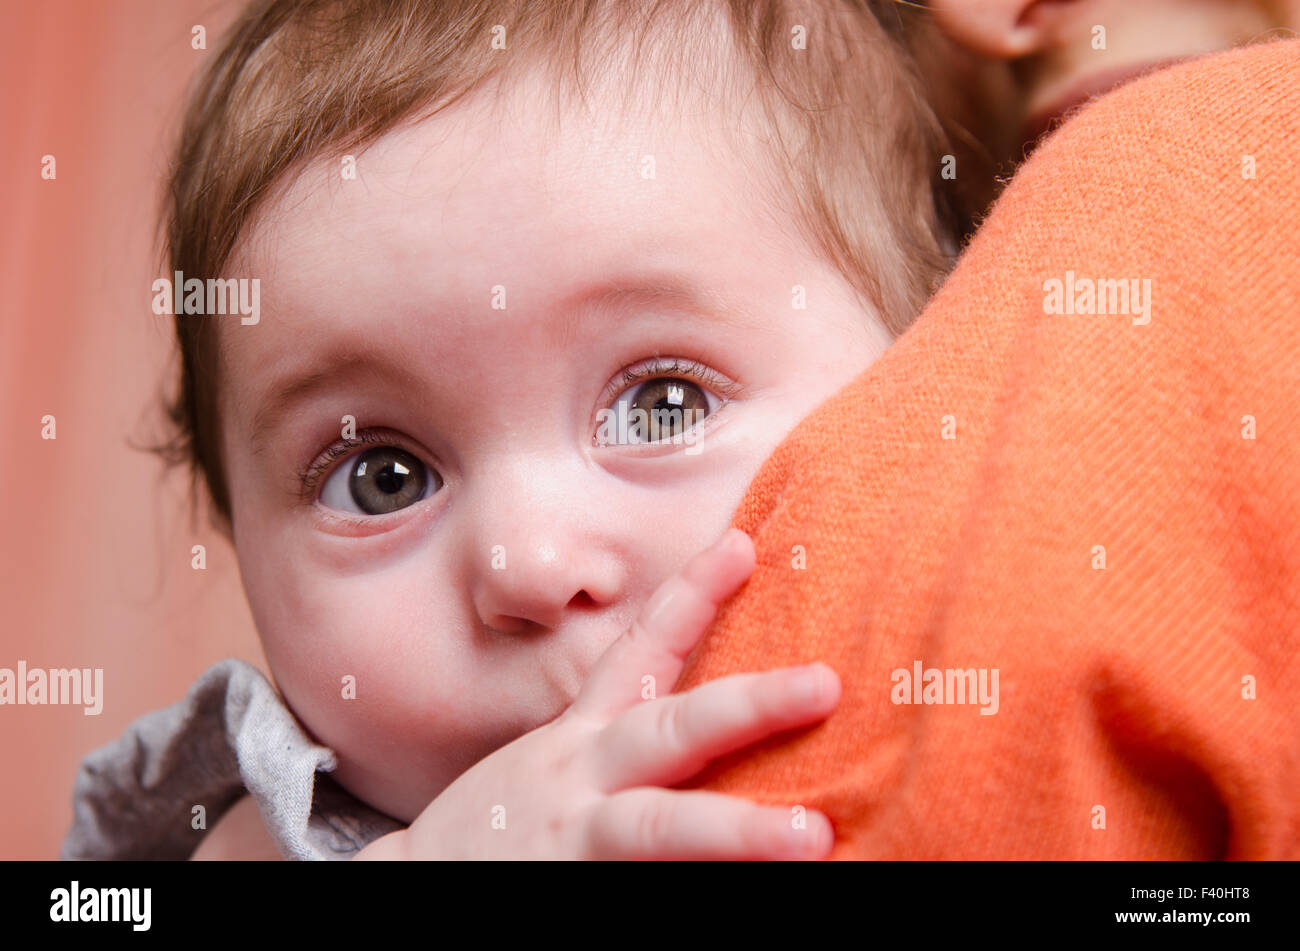 Scared kid hiding behind mom's shoulder Stock Photo